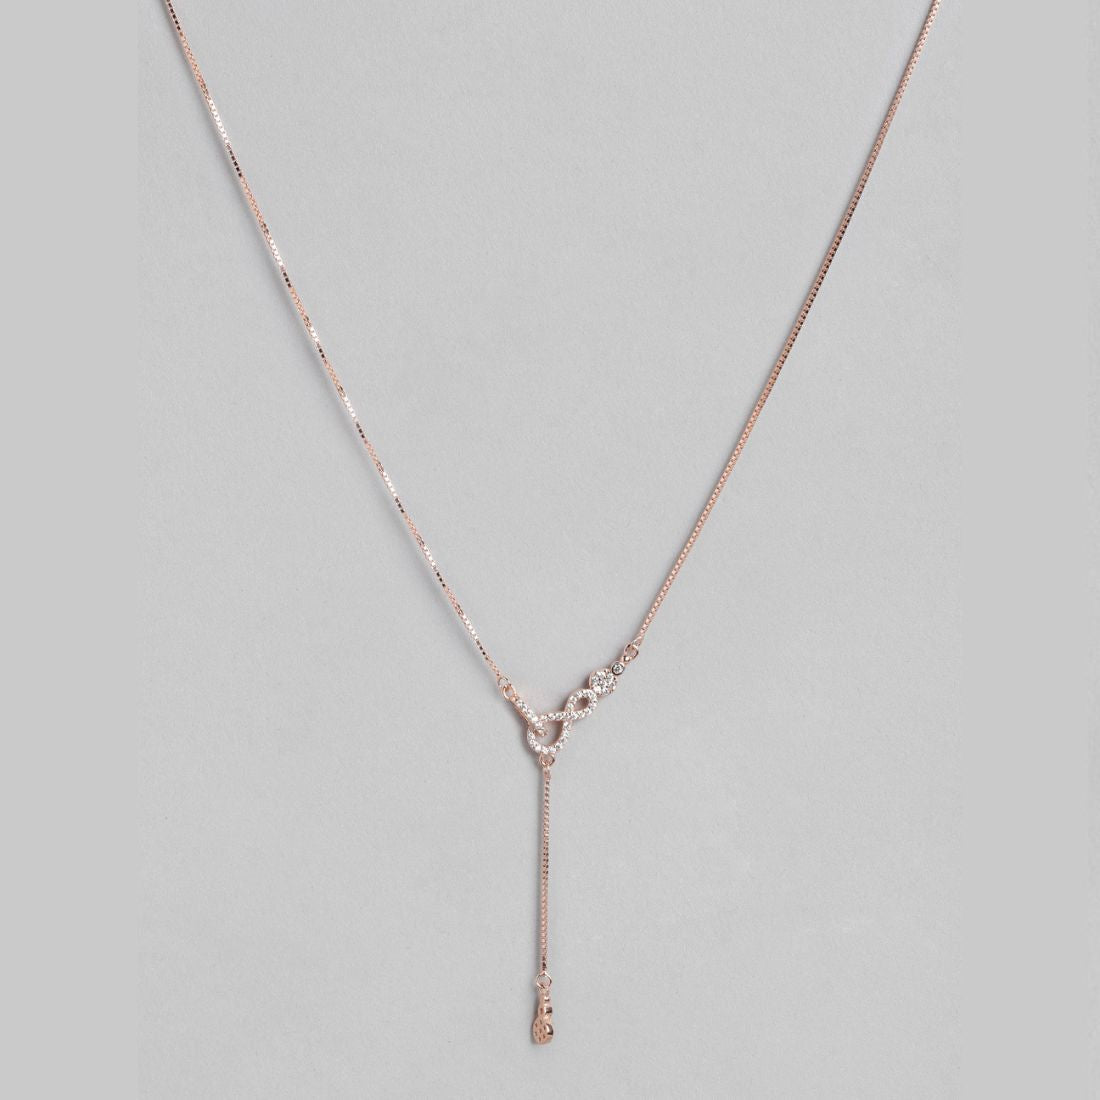 Infinite Elegance Rose Gold-Plated 925 Sterling Silver Necklace